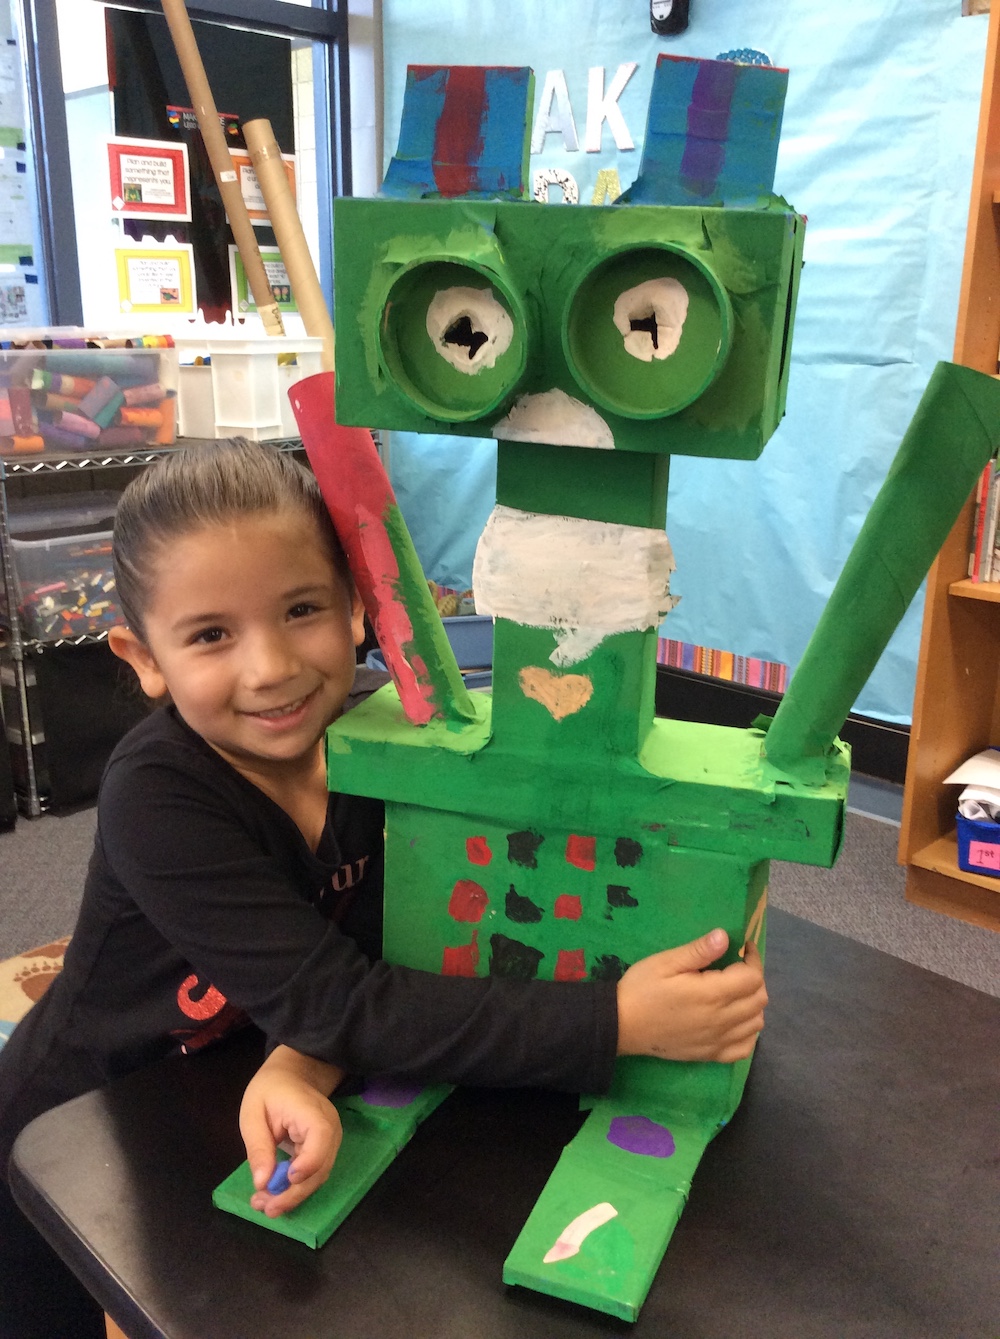 A future engineer studies science, technology, engineering, arts and mathematics at El Camino Elementary School’s STEAM lab.